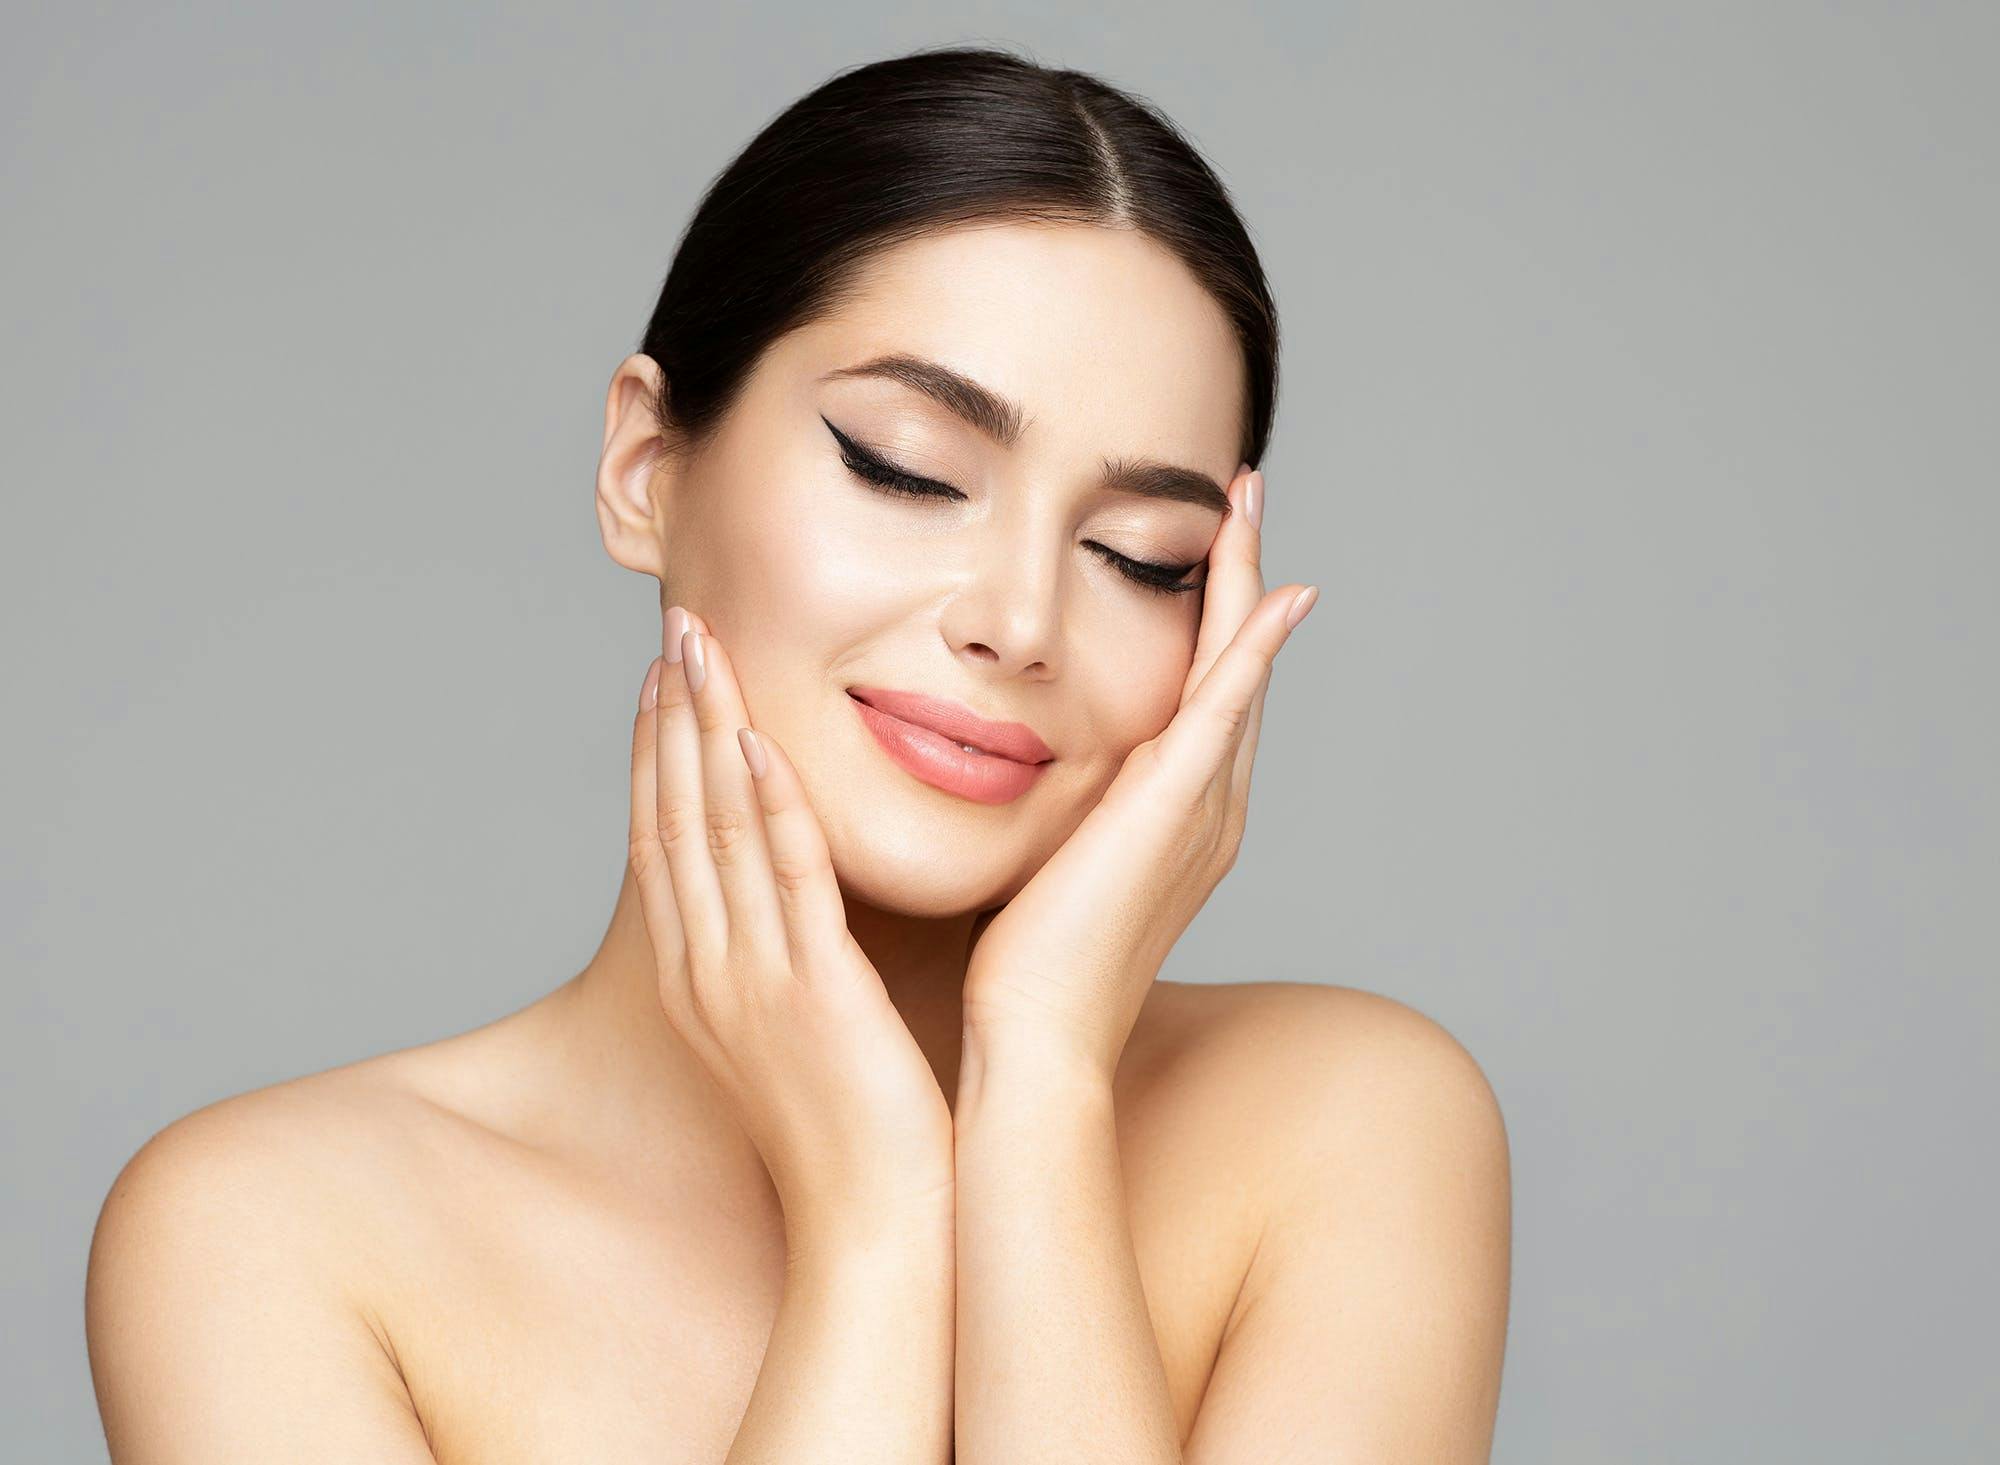 aesthetic,makeup,studio,hands,beauty,perfect,happy,enjoying,beautiful,make up,model,female,massage,plastic surgery,eyes closed,dreaming,smiling,spa,pamper,girl,cosmetology,cheeks,background,care,salon,women,treatment,woman,eyeliner,isolated,skin,lipstick,dermal,facelift,cosmetics,gray,facial,smooth,applying,chin,touching,therapy,health,portrait,people,face,lips,mouth,permanent,filler adult female person woman head face skin